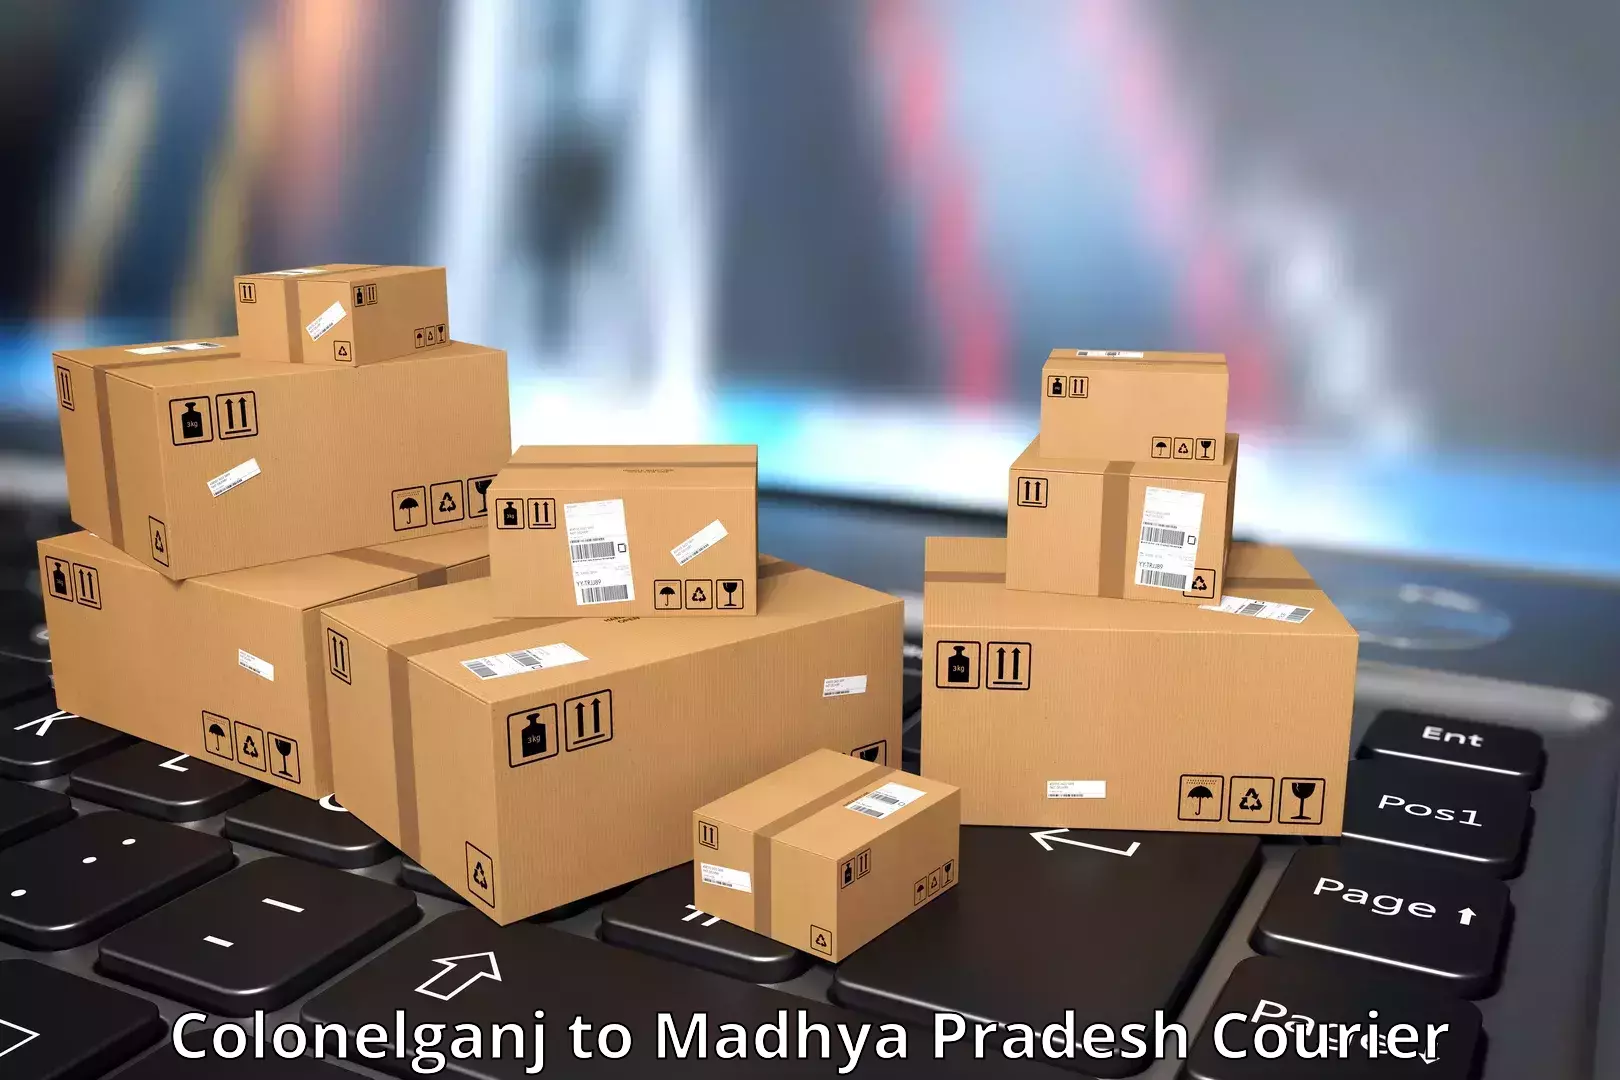 Package consolidation in Colonelganj to Madhya Pradesh